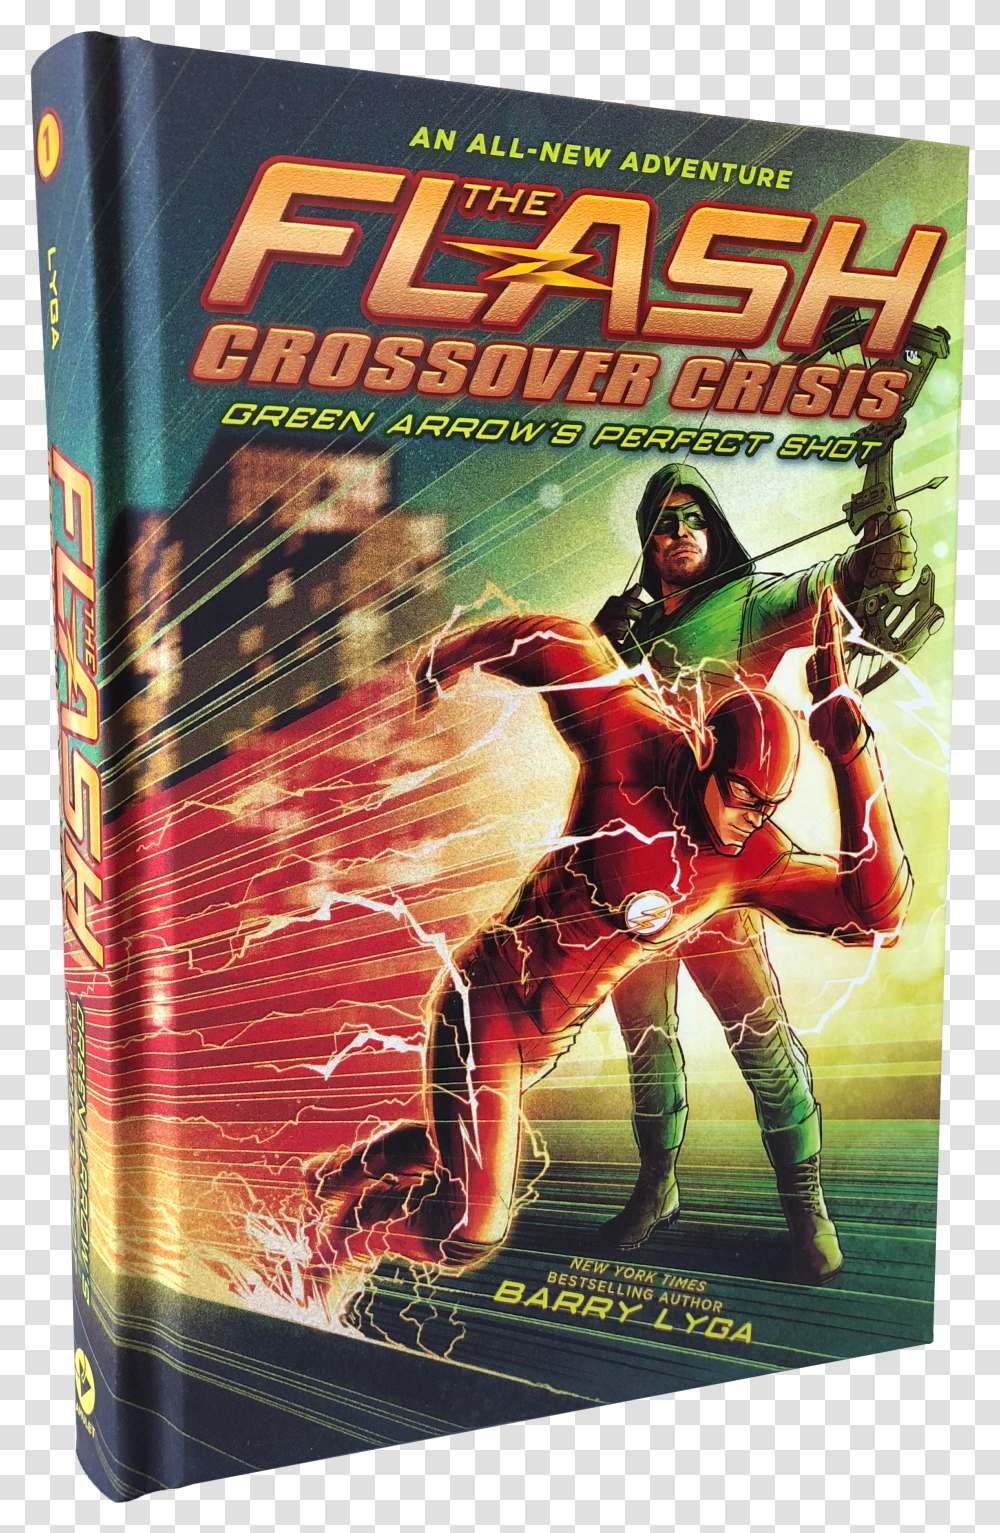 Abrams San Diego Comic Con 2019 Exclusives Giveaways Flash Crossover Crisis Book Transparent Png